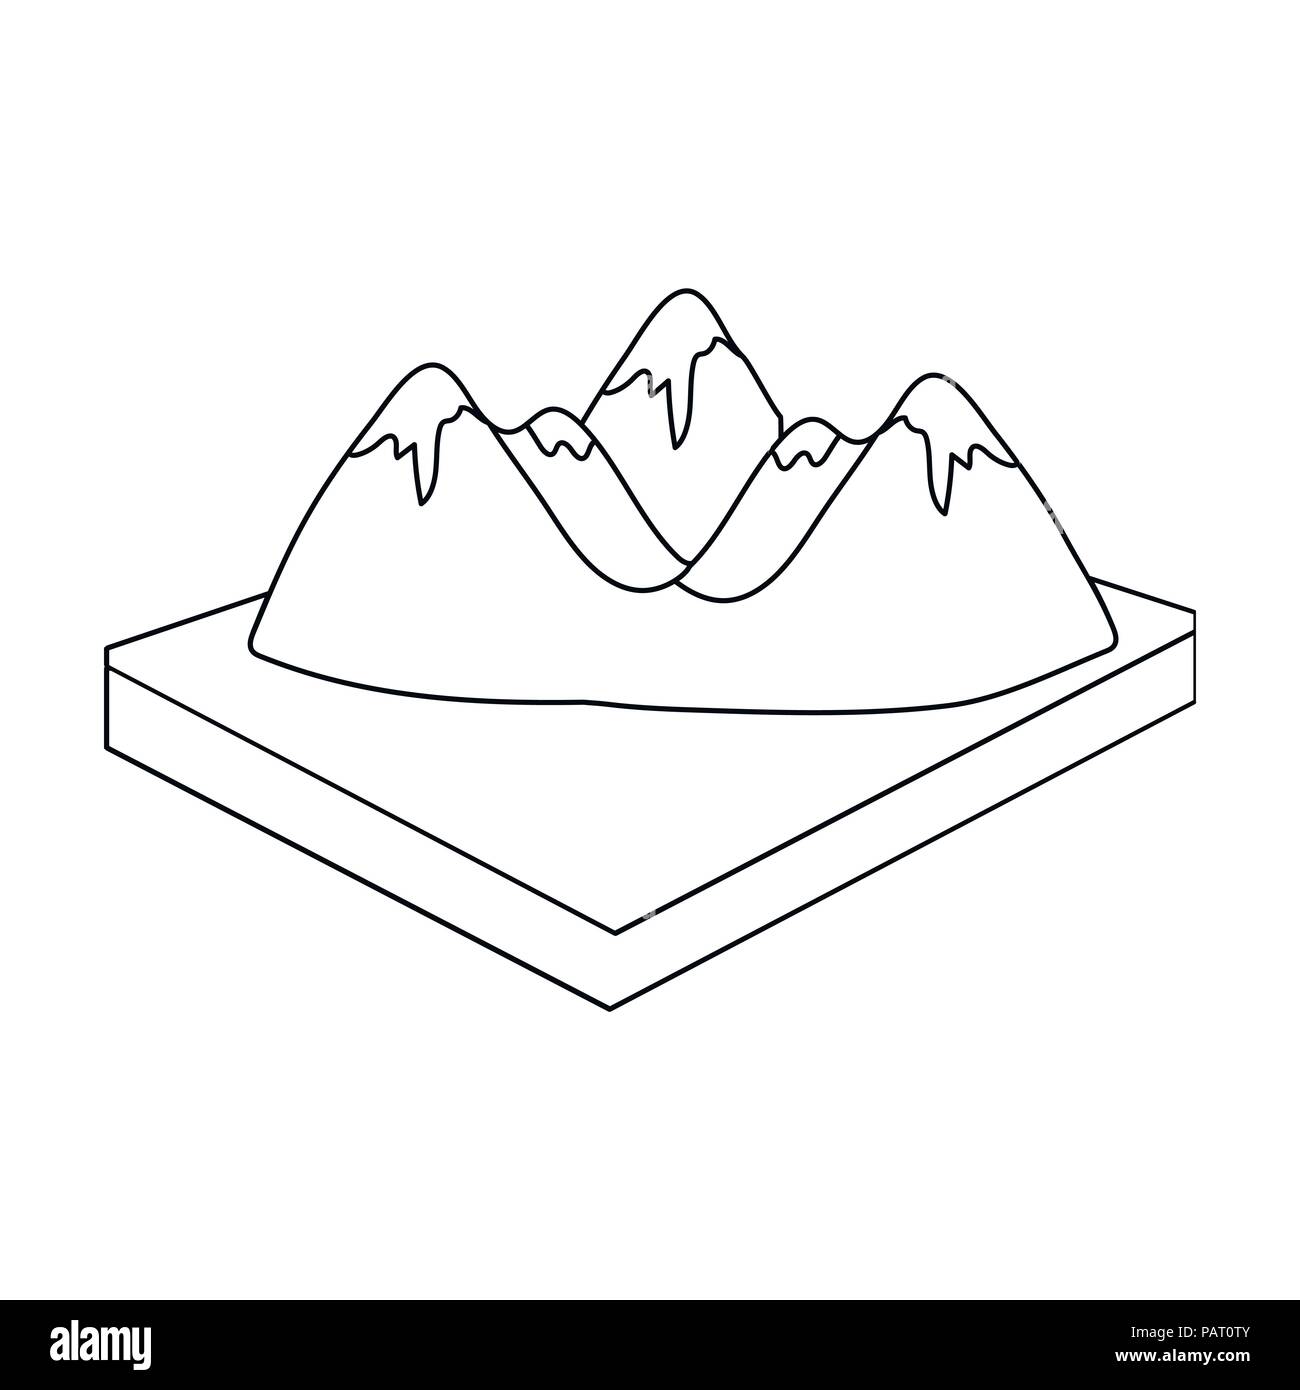 apex,boulder,earth,glacier,grass,icon,illustration,isolated,isometric,landscape,layout,logo,massif,mountain,outline,peak,relief,relievo,rock,sign,slice,stone,surface,symbol,topography,vector,vegetation,web,  Vector Vectors Stock Vector Image & Art - Alamy